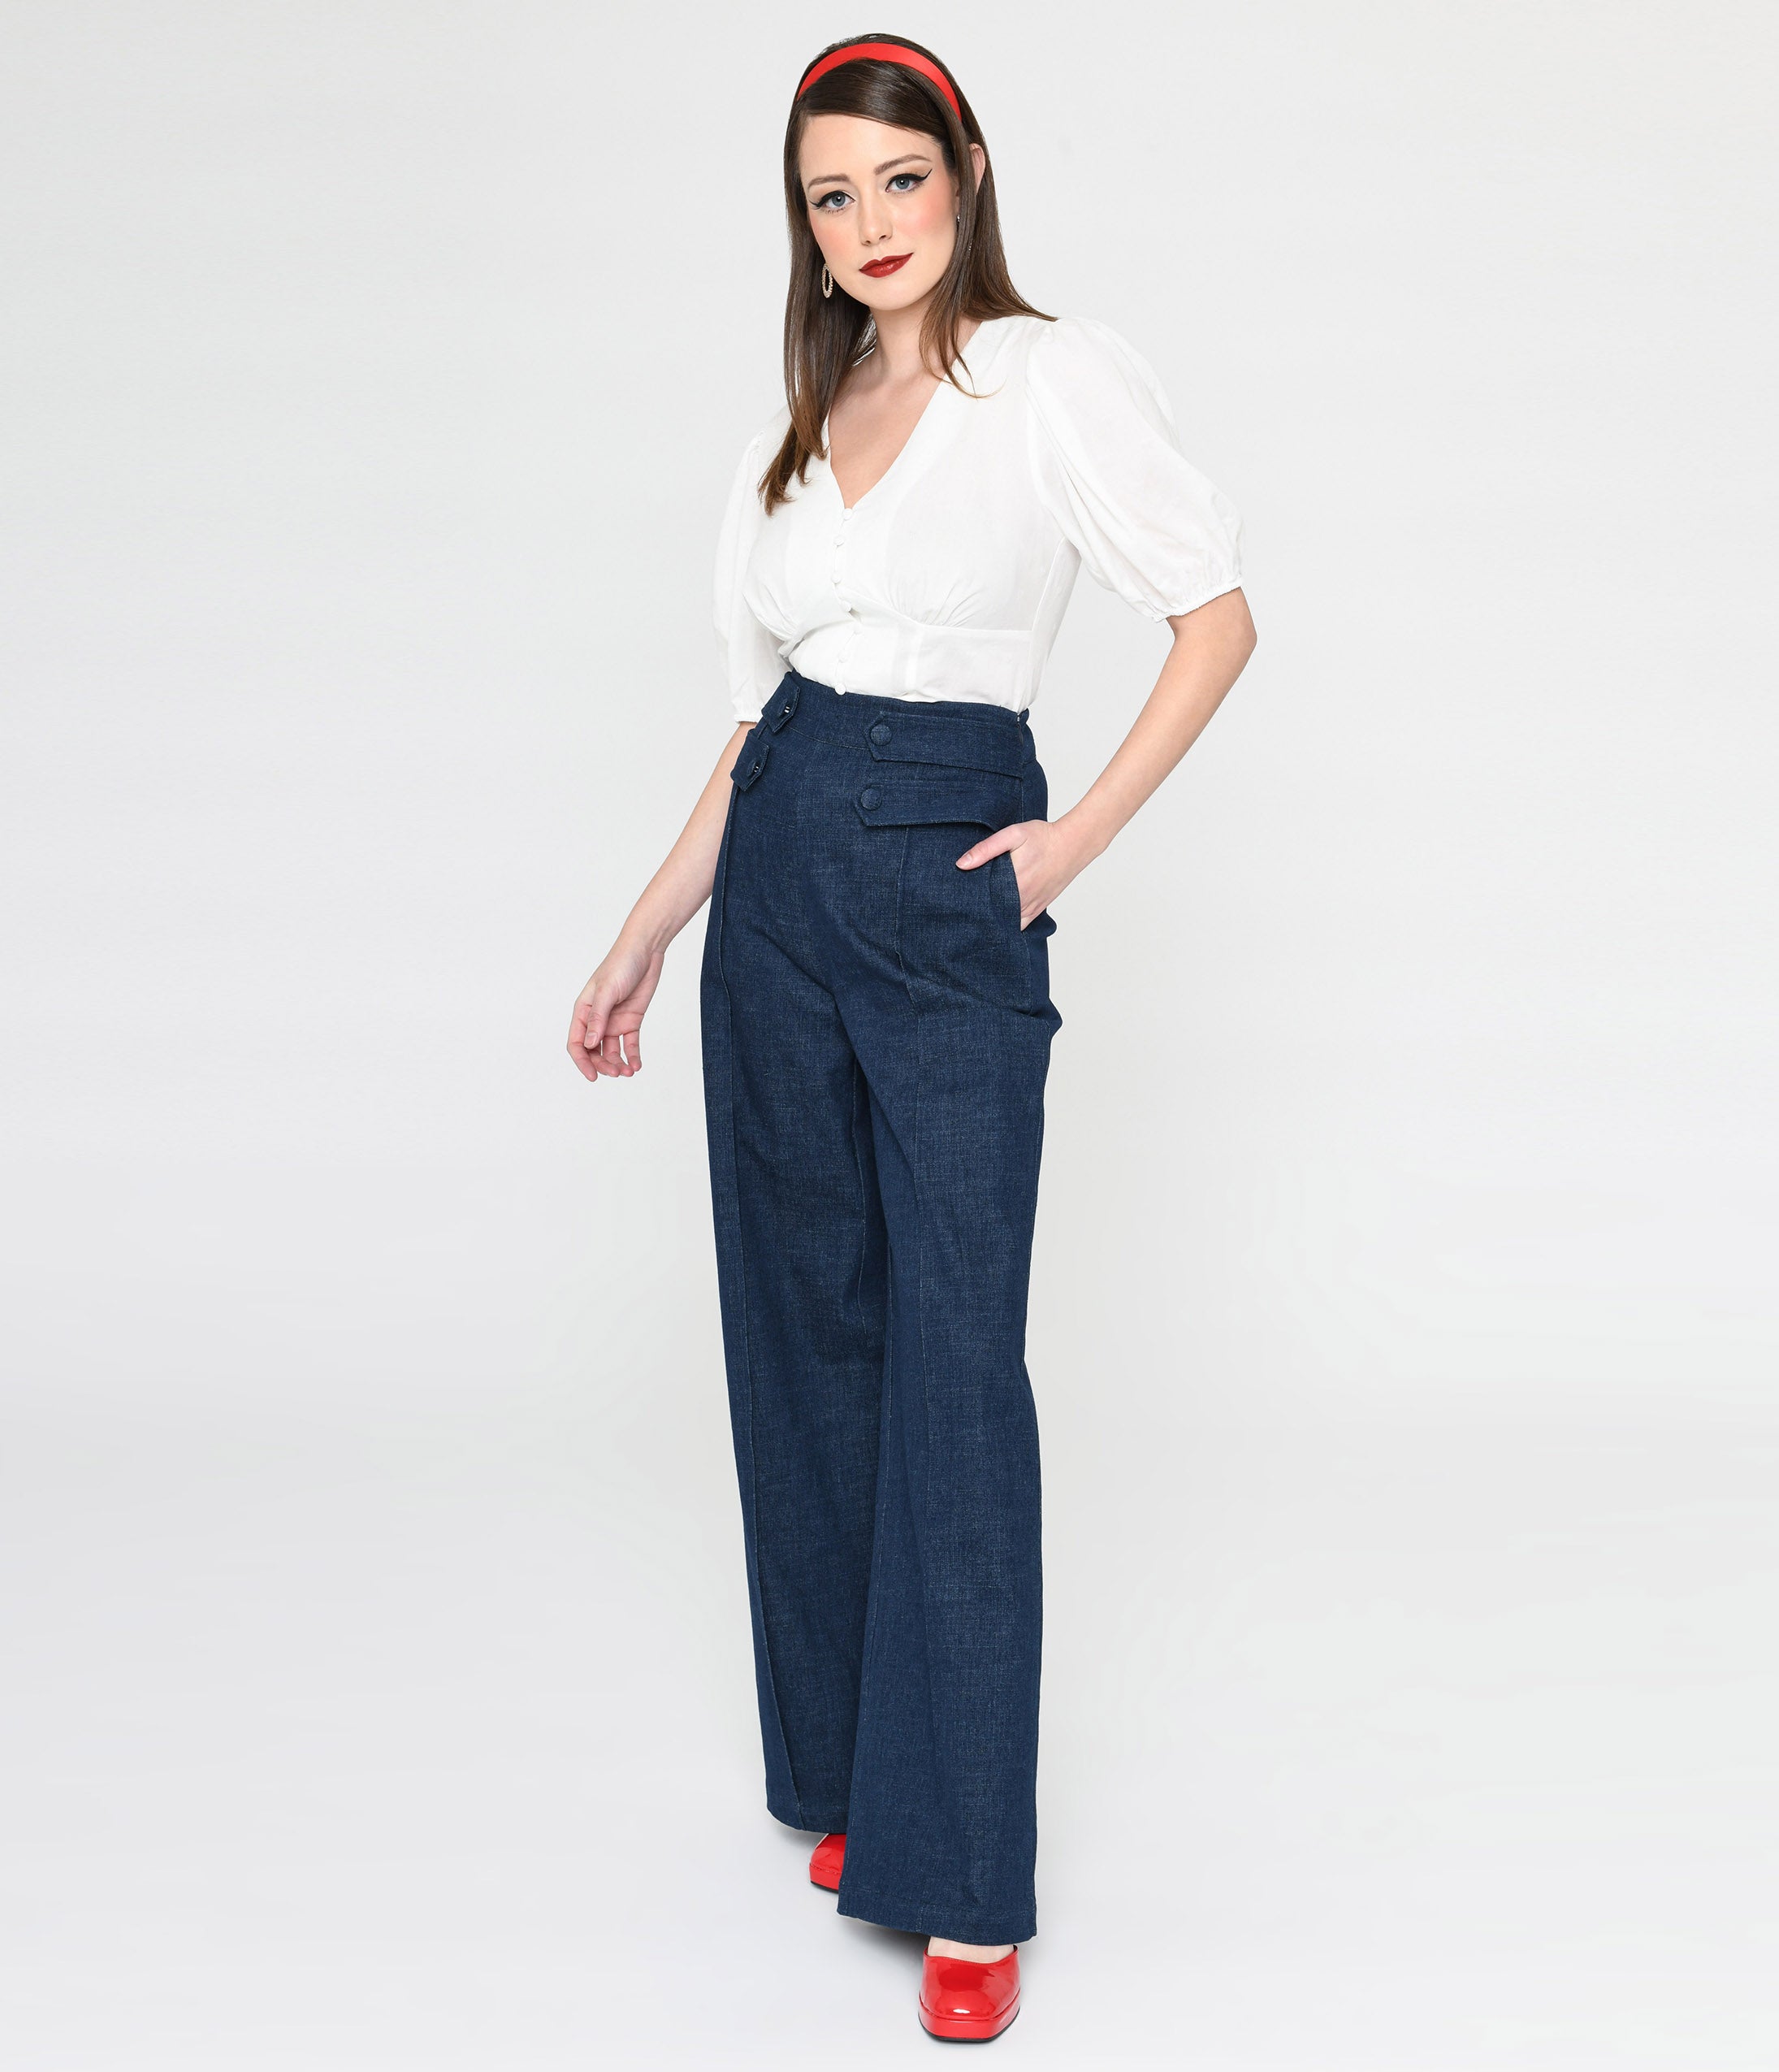 Unique Vintage Thelma High-Waisted Suspender Trousers for Women